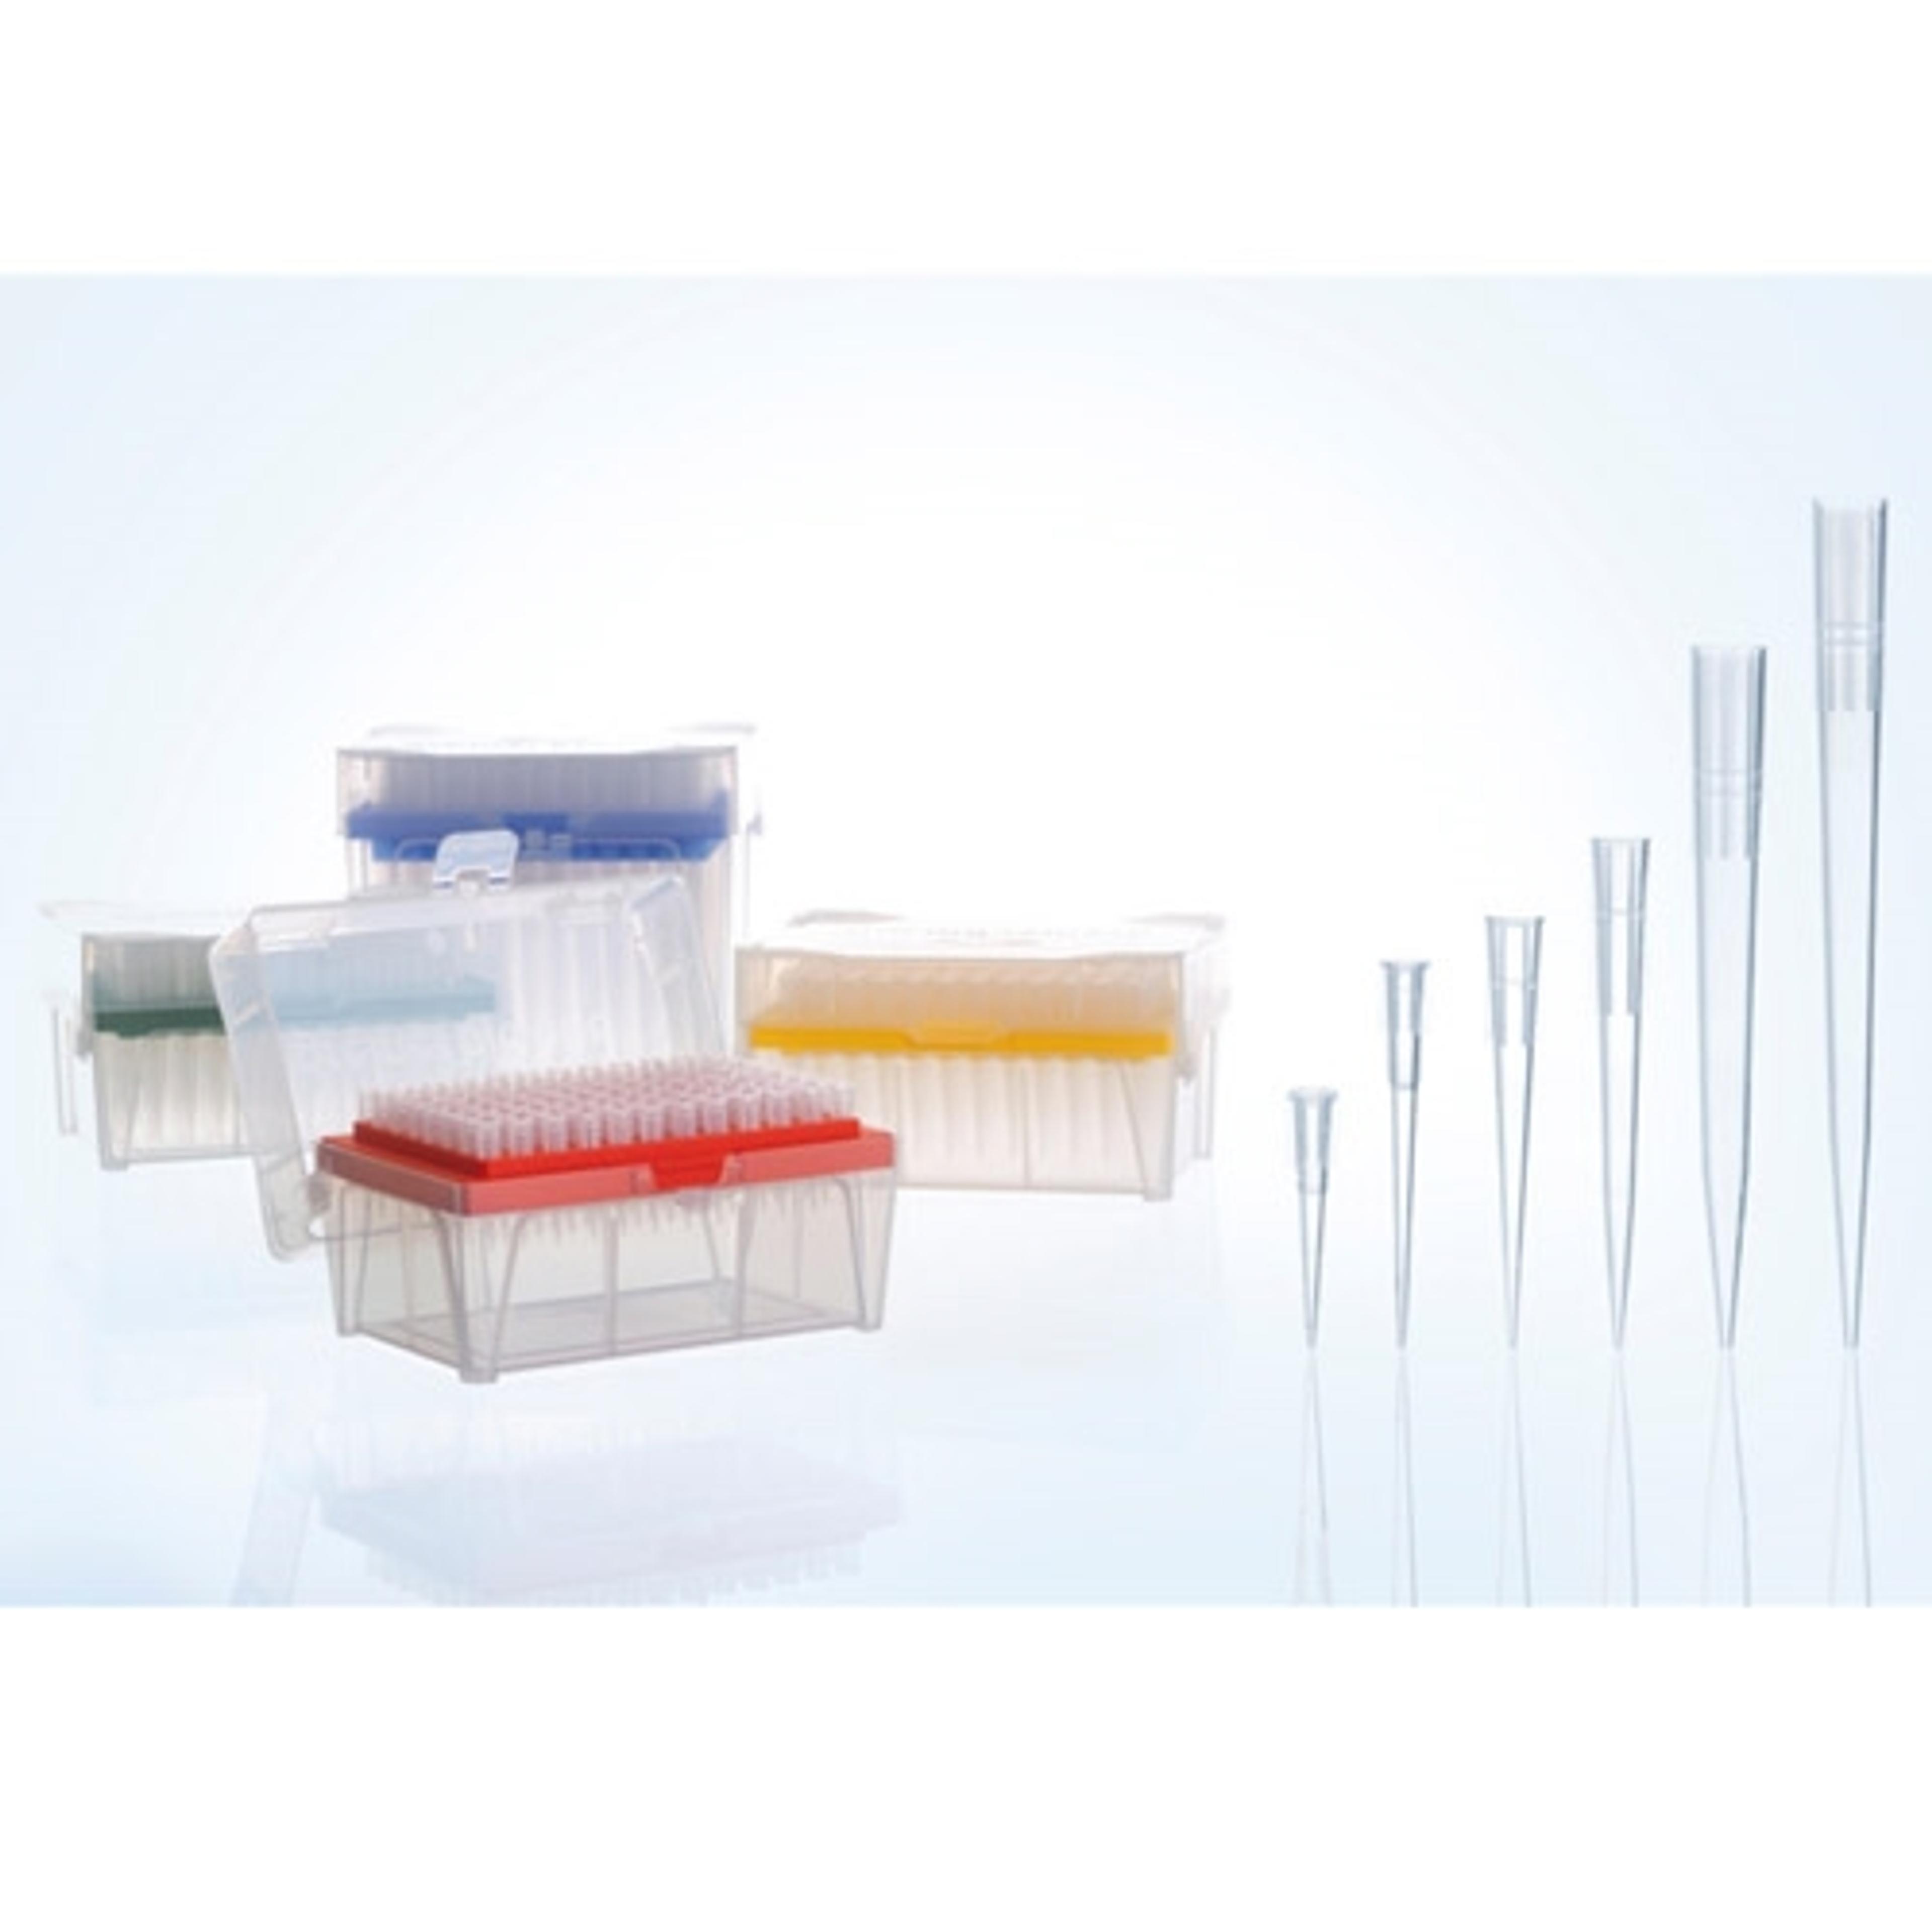 Sapphire pipette tips with color-coded boxes